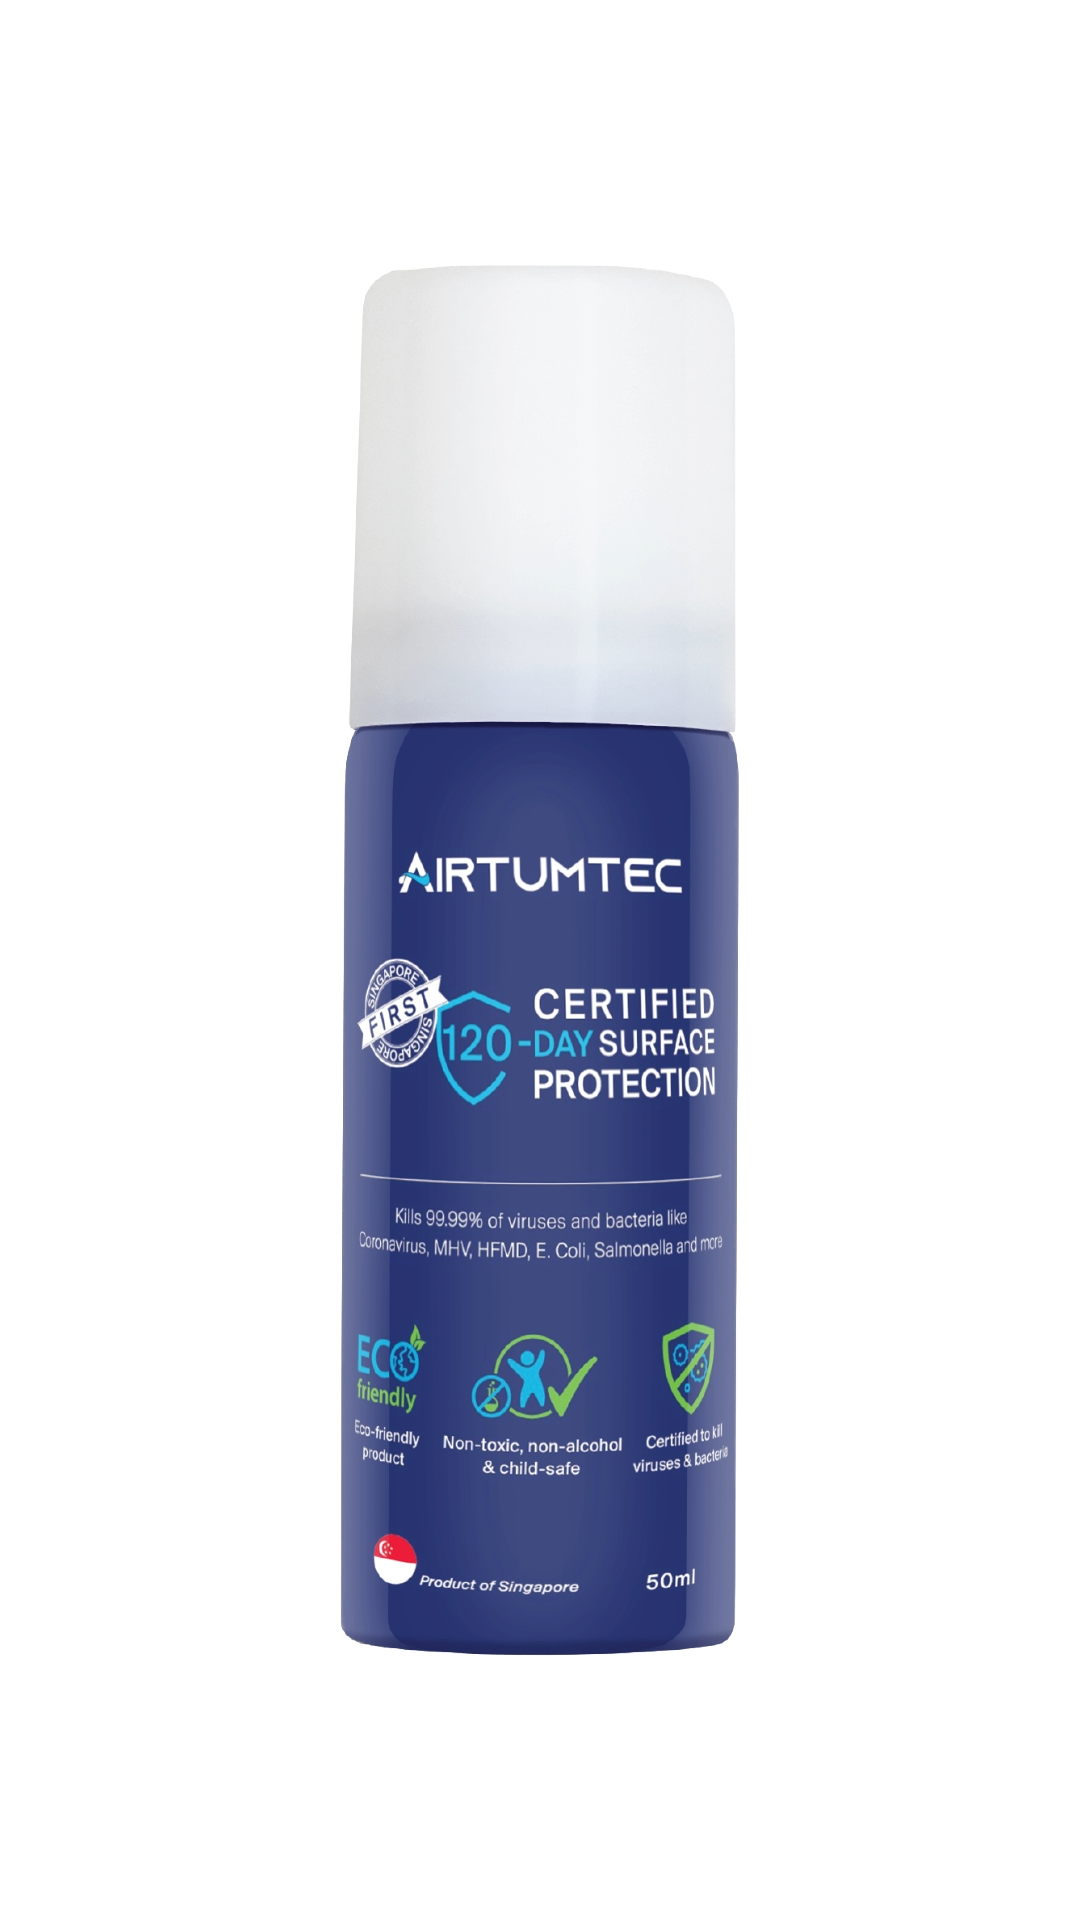 AirTumtec Self-disinfecting Antimicrobial Spray 50ml